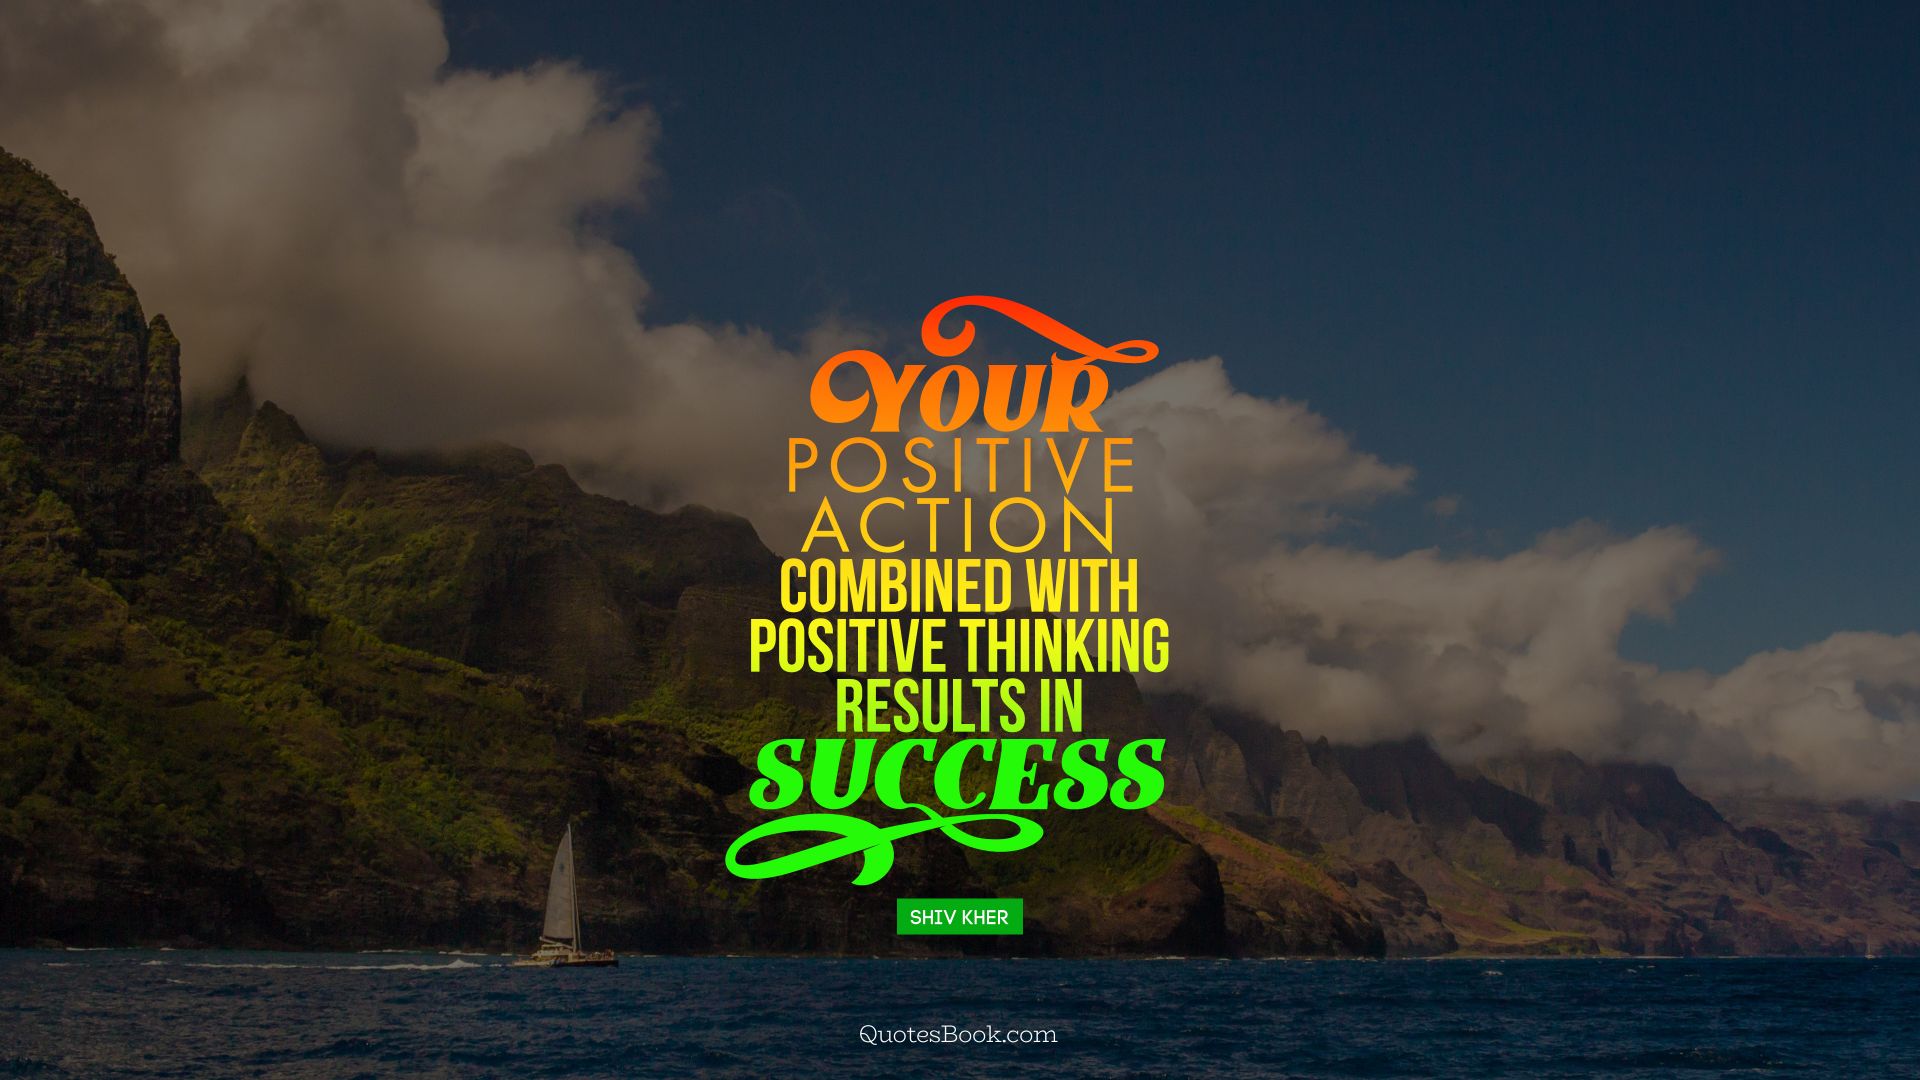 Your positive action combined with positive thinking results in success. - Quote by Shiv Khera